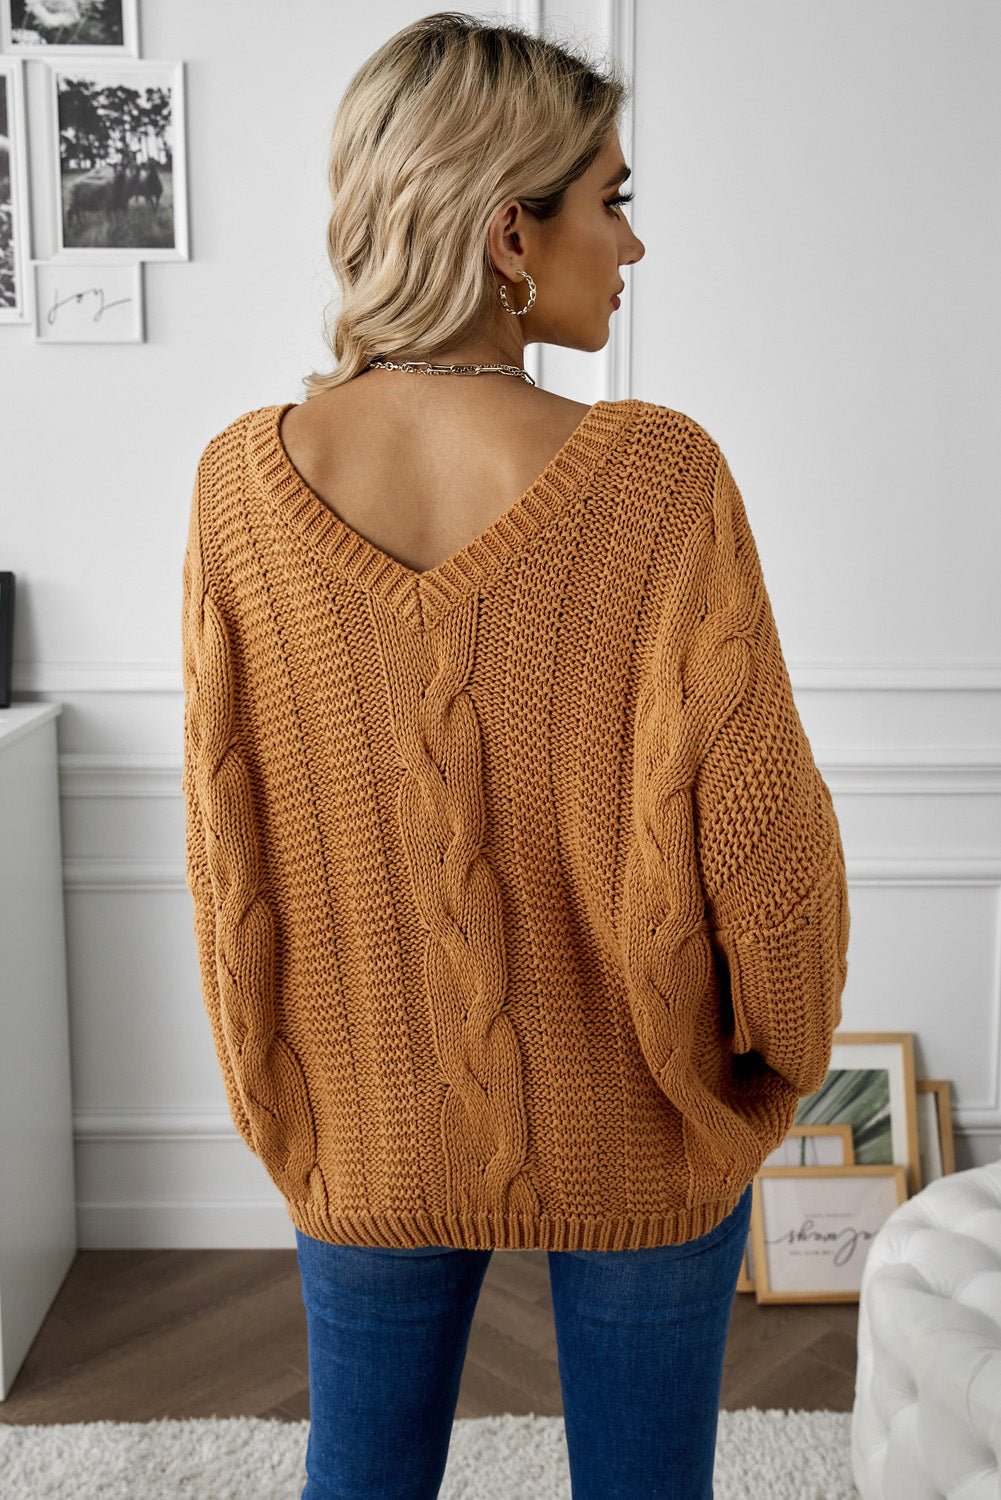 Cable Knit V-Neck Sweater - Fashion Girl Online Store